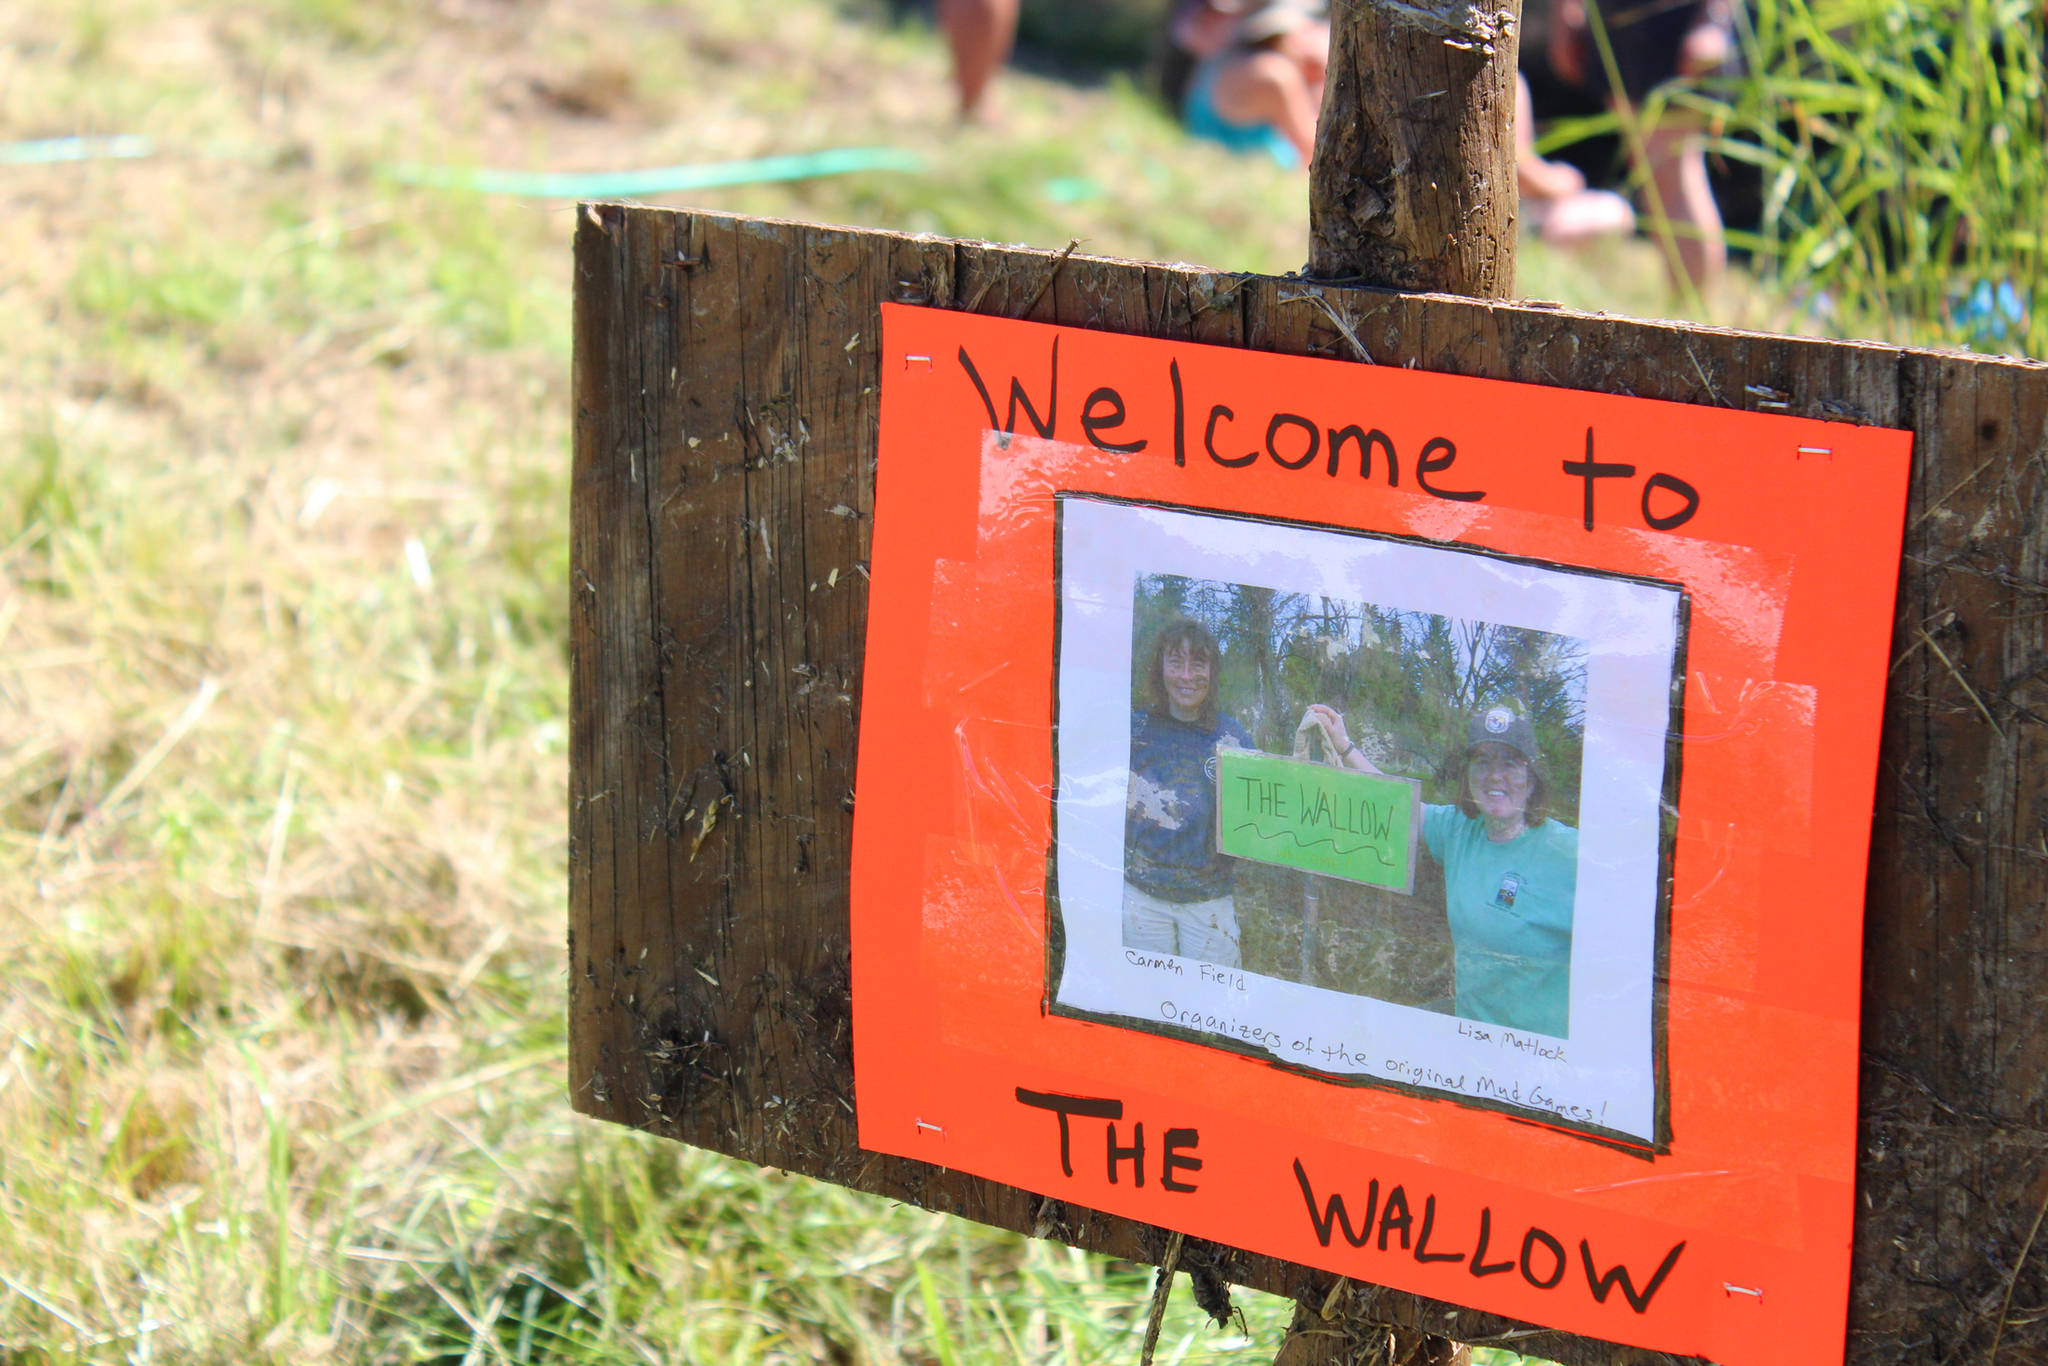 Photo by Megan Pacer/Homer News A sign depicting Mud Wallow co-founders Lisa Matlock and the late Carmen Field during welcomes the young and old to this year’s Mud Wallow on Saturday, July 22, 2017 at Cottonwood Horse Park in Homer, Alaska.